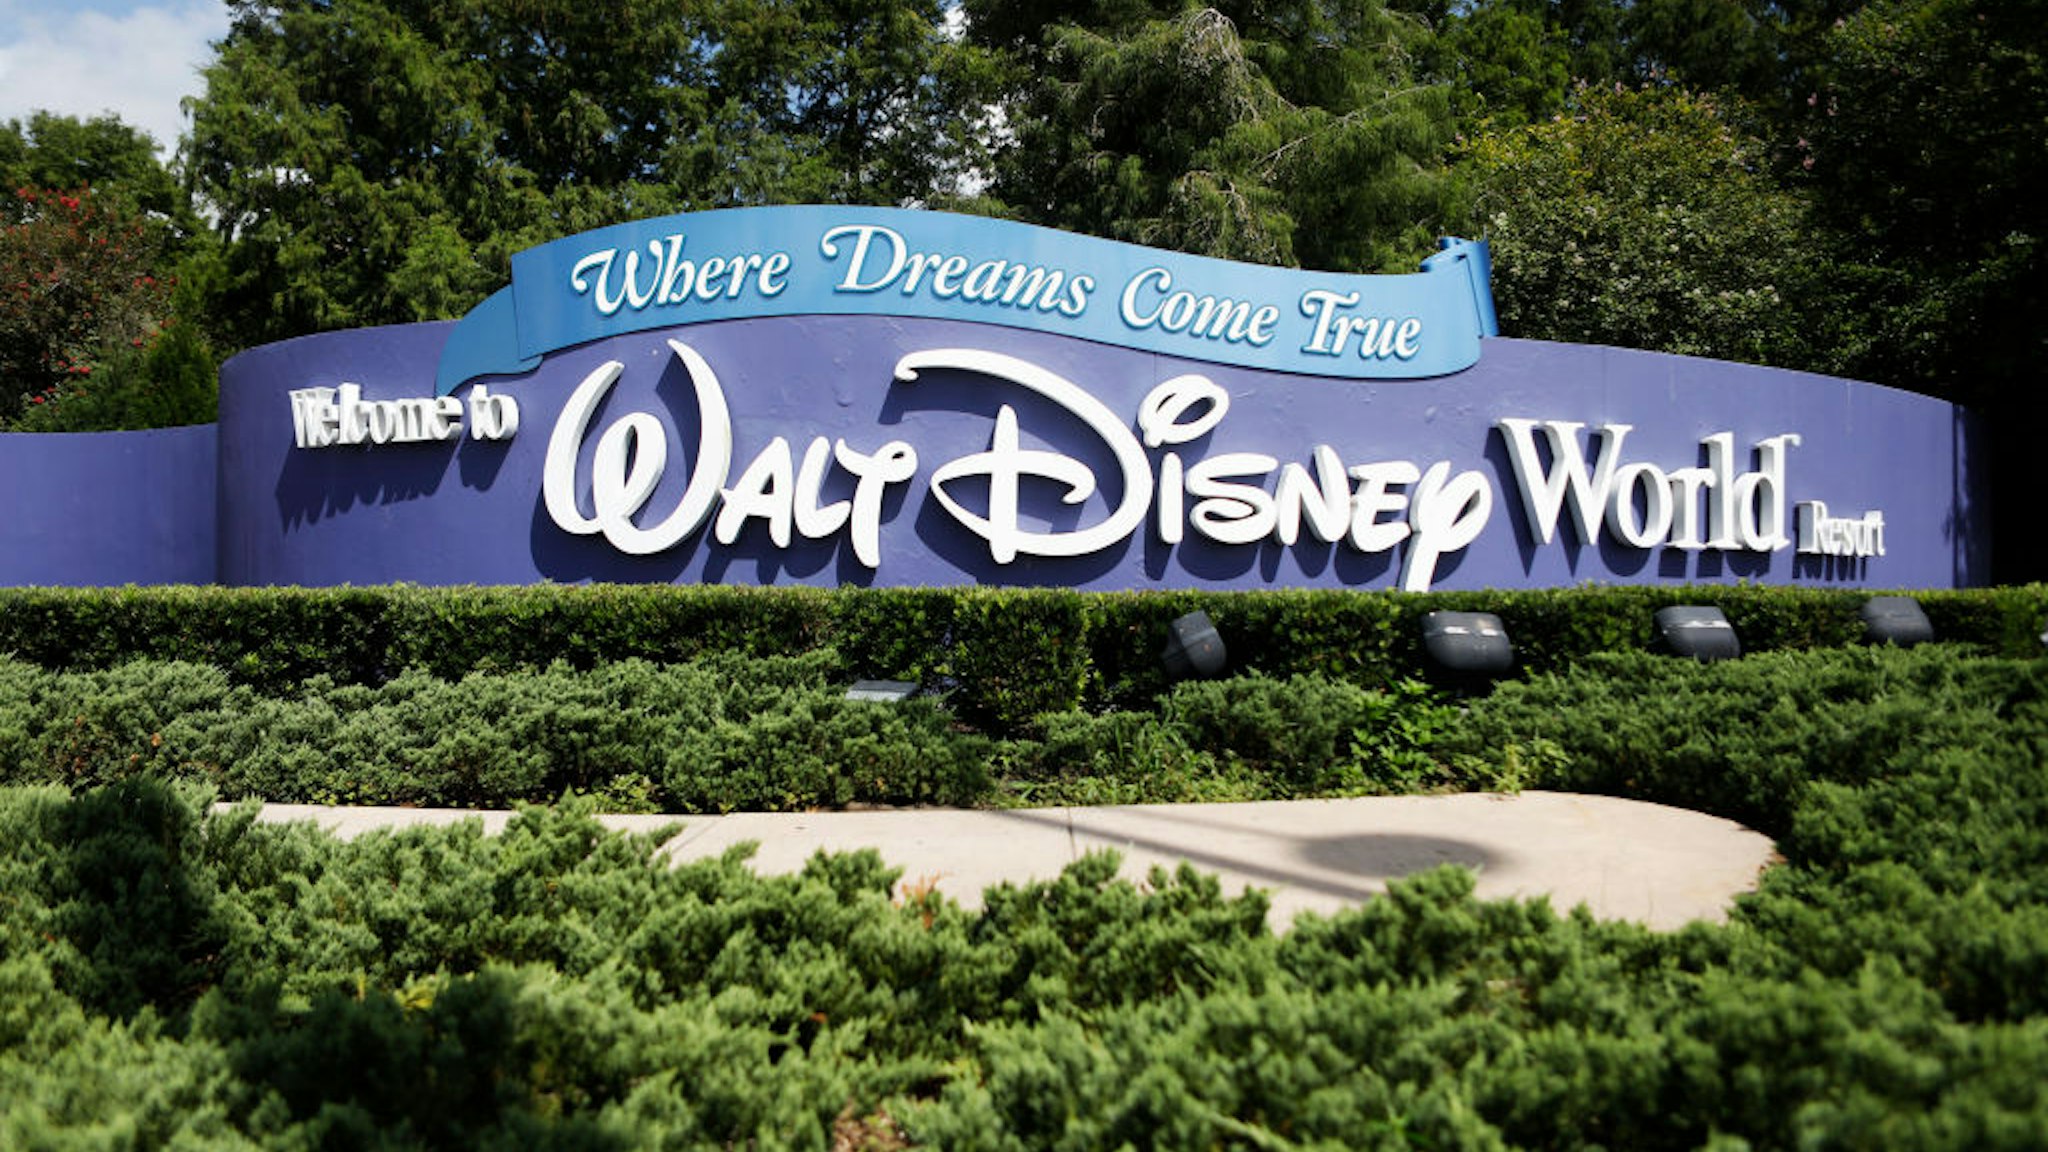 LAKE BUENA VISTA, FL - JULY 09: A view of the Walt Disney World theme park entrance on July 9, 2020 in Lake Buena Vista, Florida. The theme park is scheduled to reopen on Saturday despite a surge in new Covid-19 infections throughout Florida, including the central part of the state where Orlando is located.